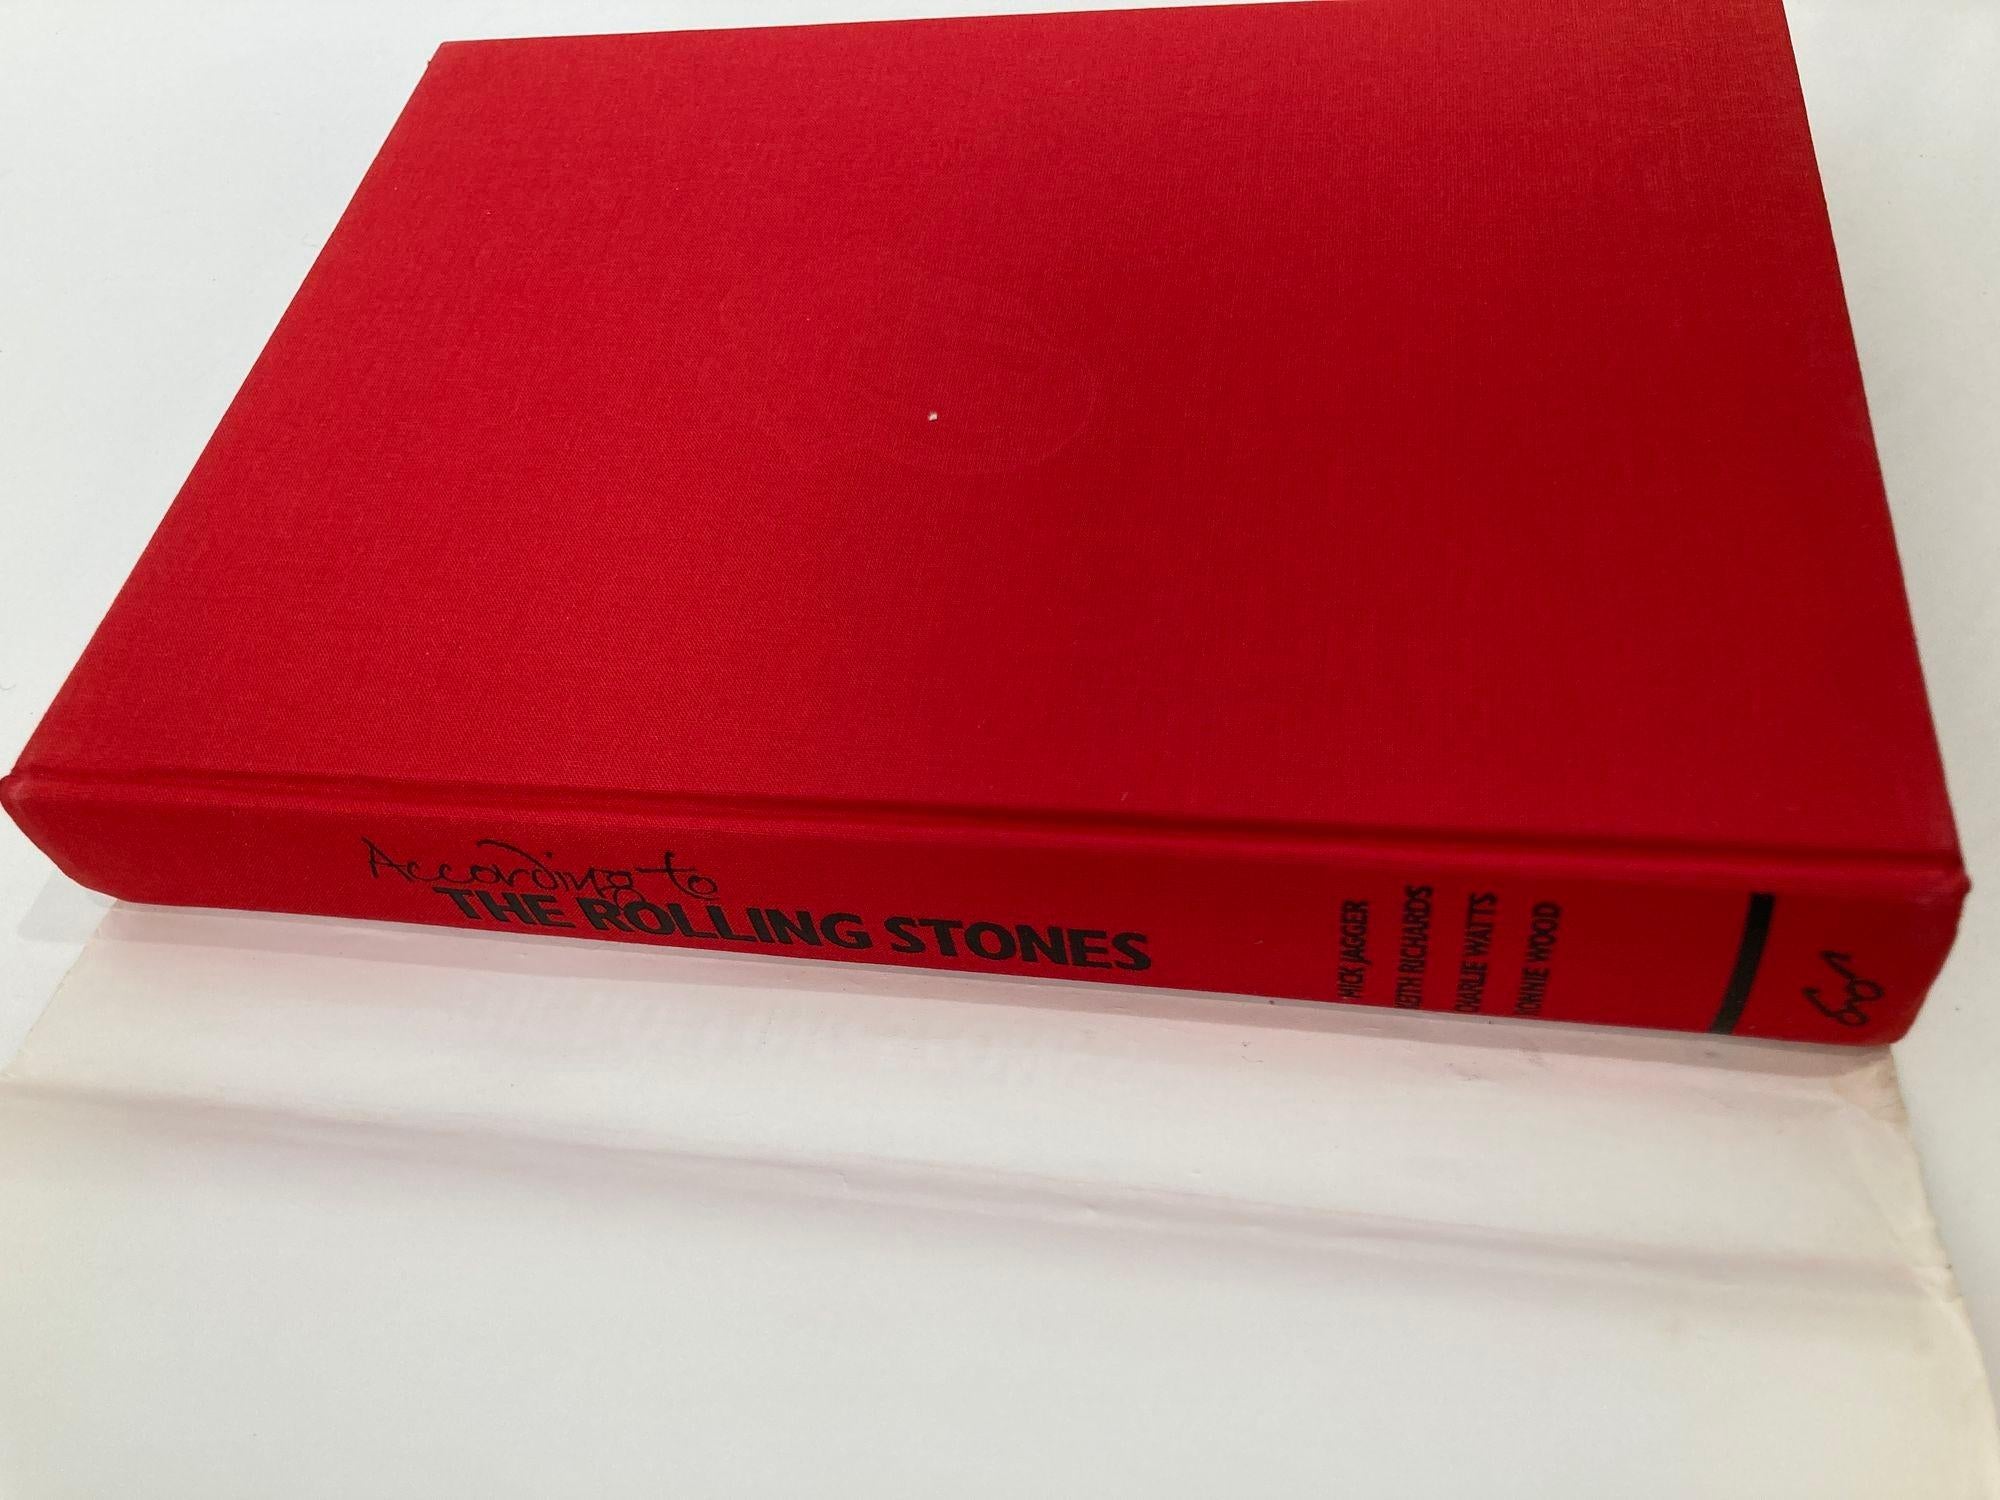 According to The Rolling Stones Hardcover Table Book For Sale 2